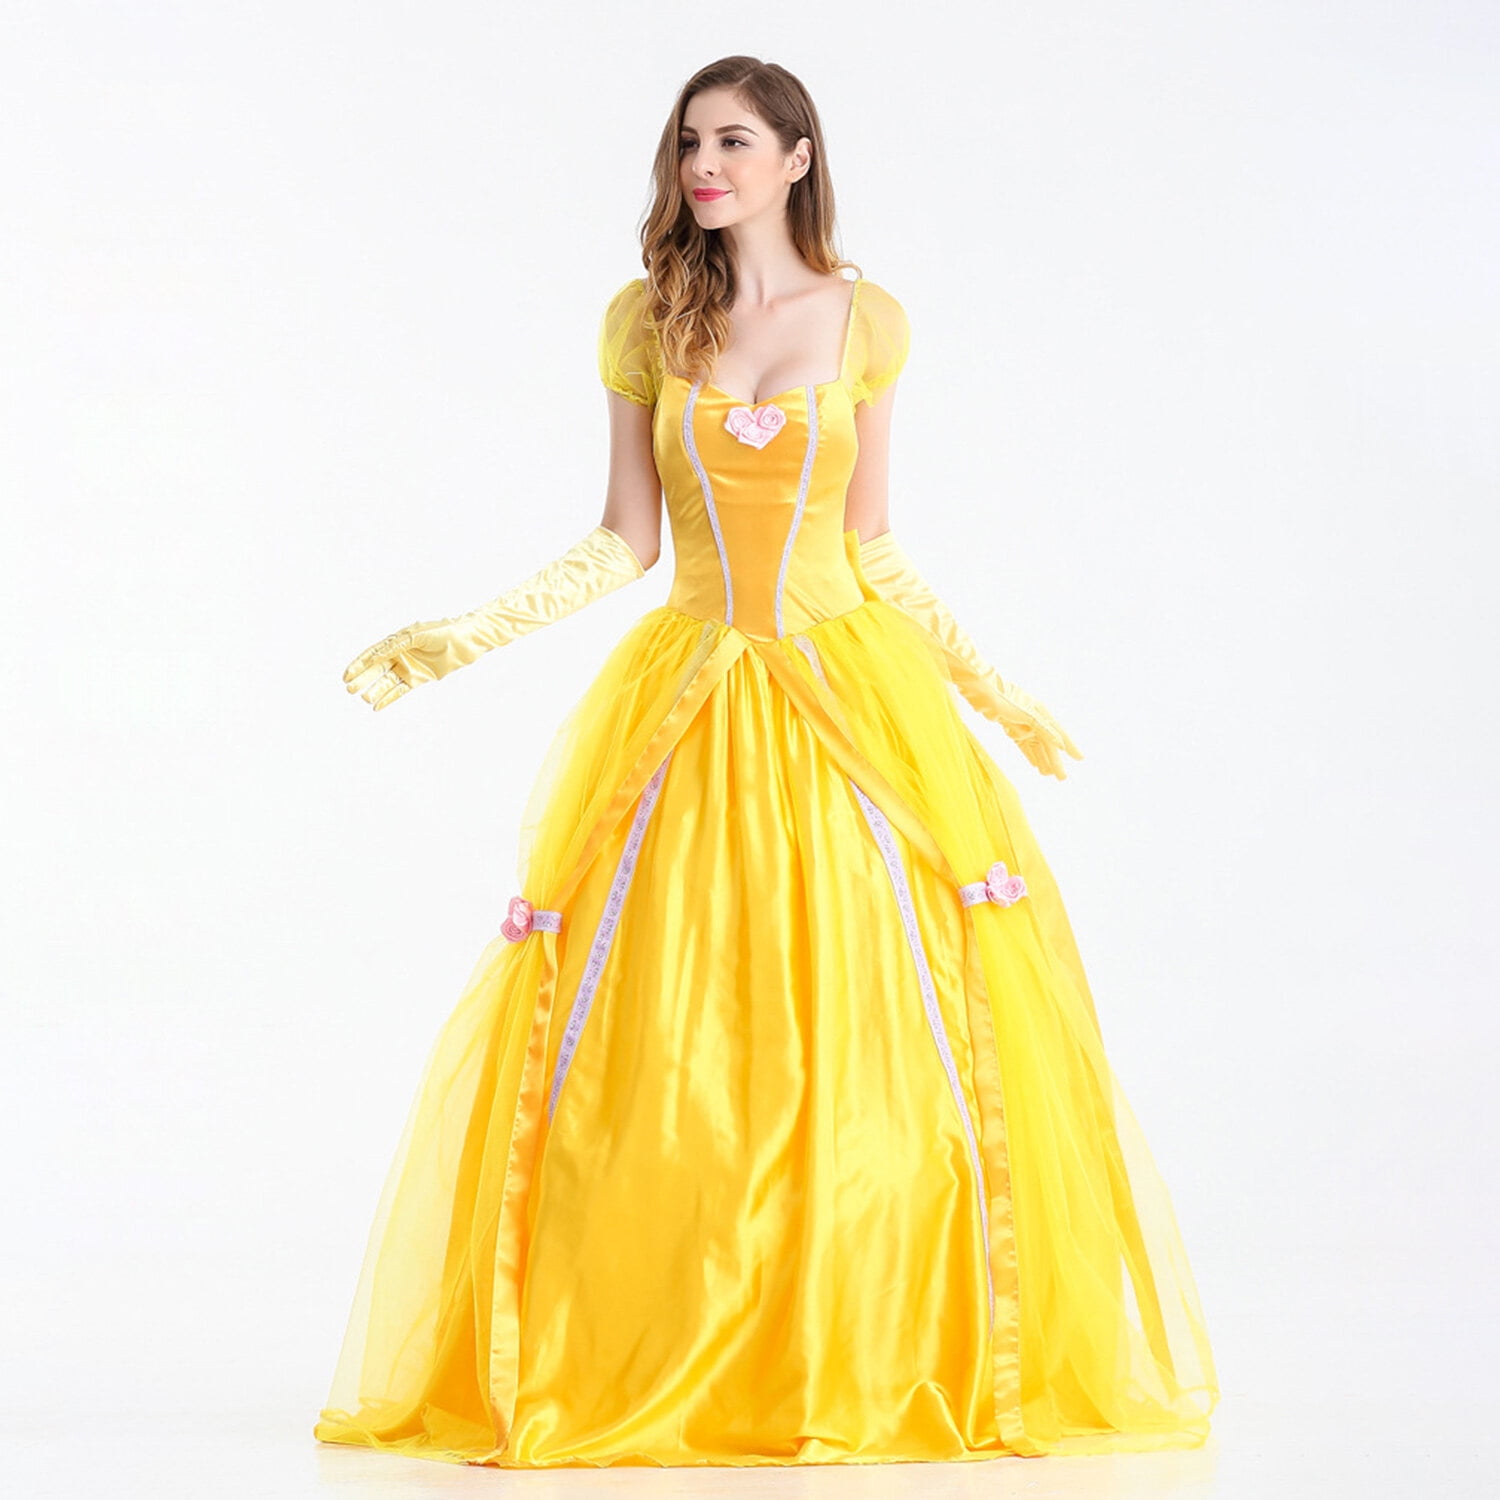 Princess Beauty Costume for Women , Girl Princess Belle Dress up Ball Gown  with Petticoat, Halloween Costume Adult 